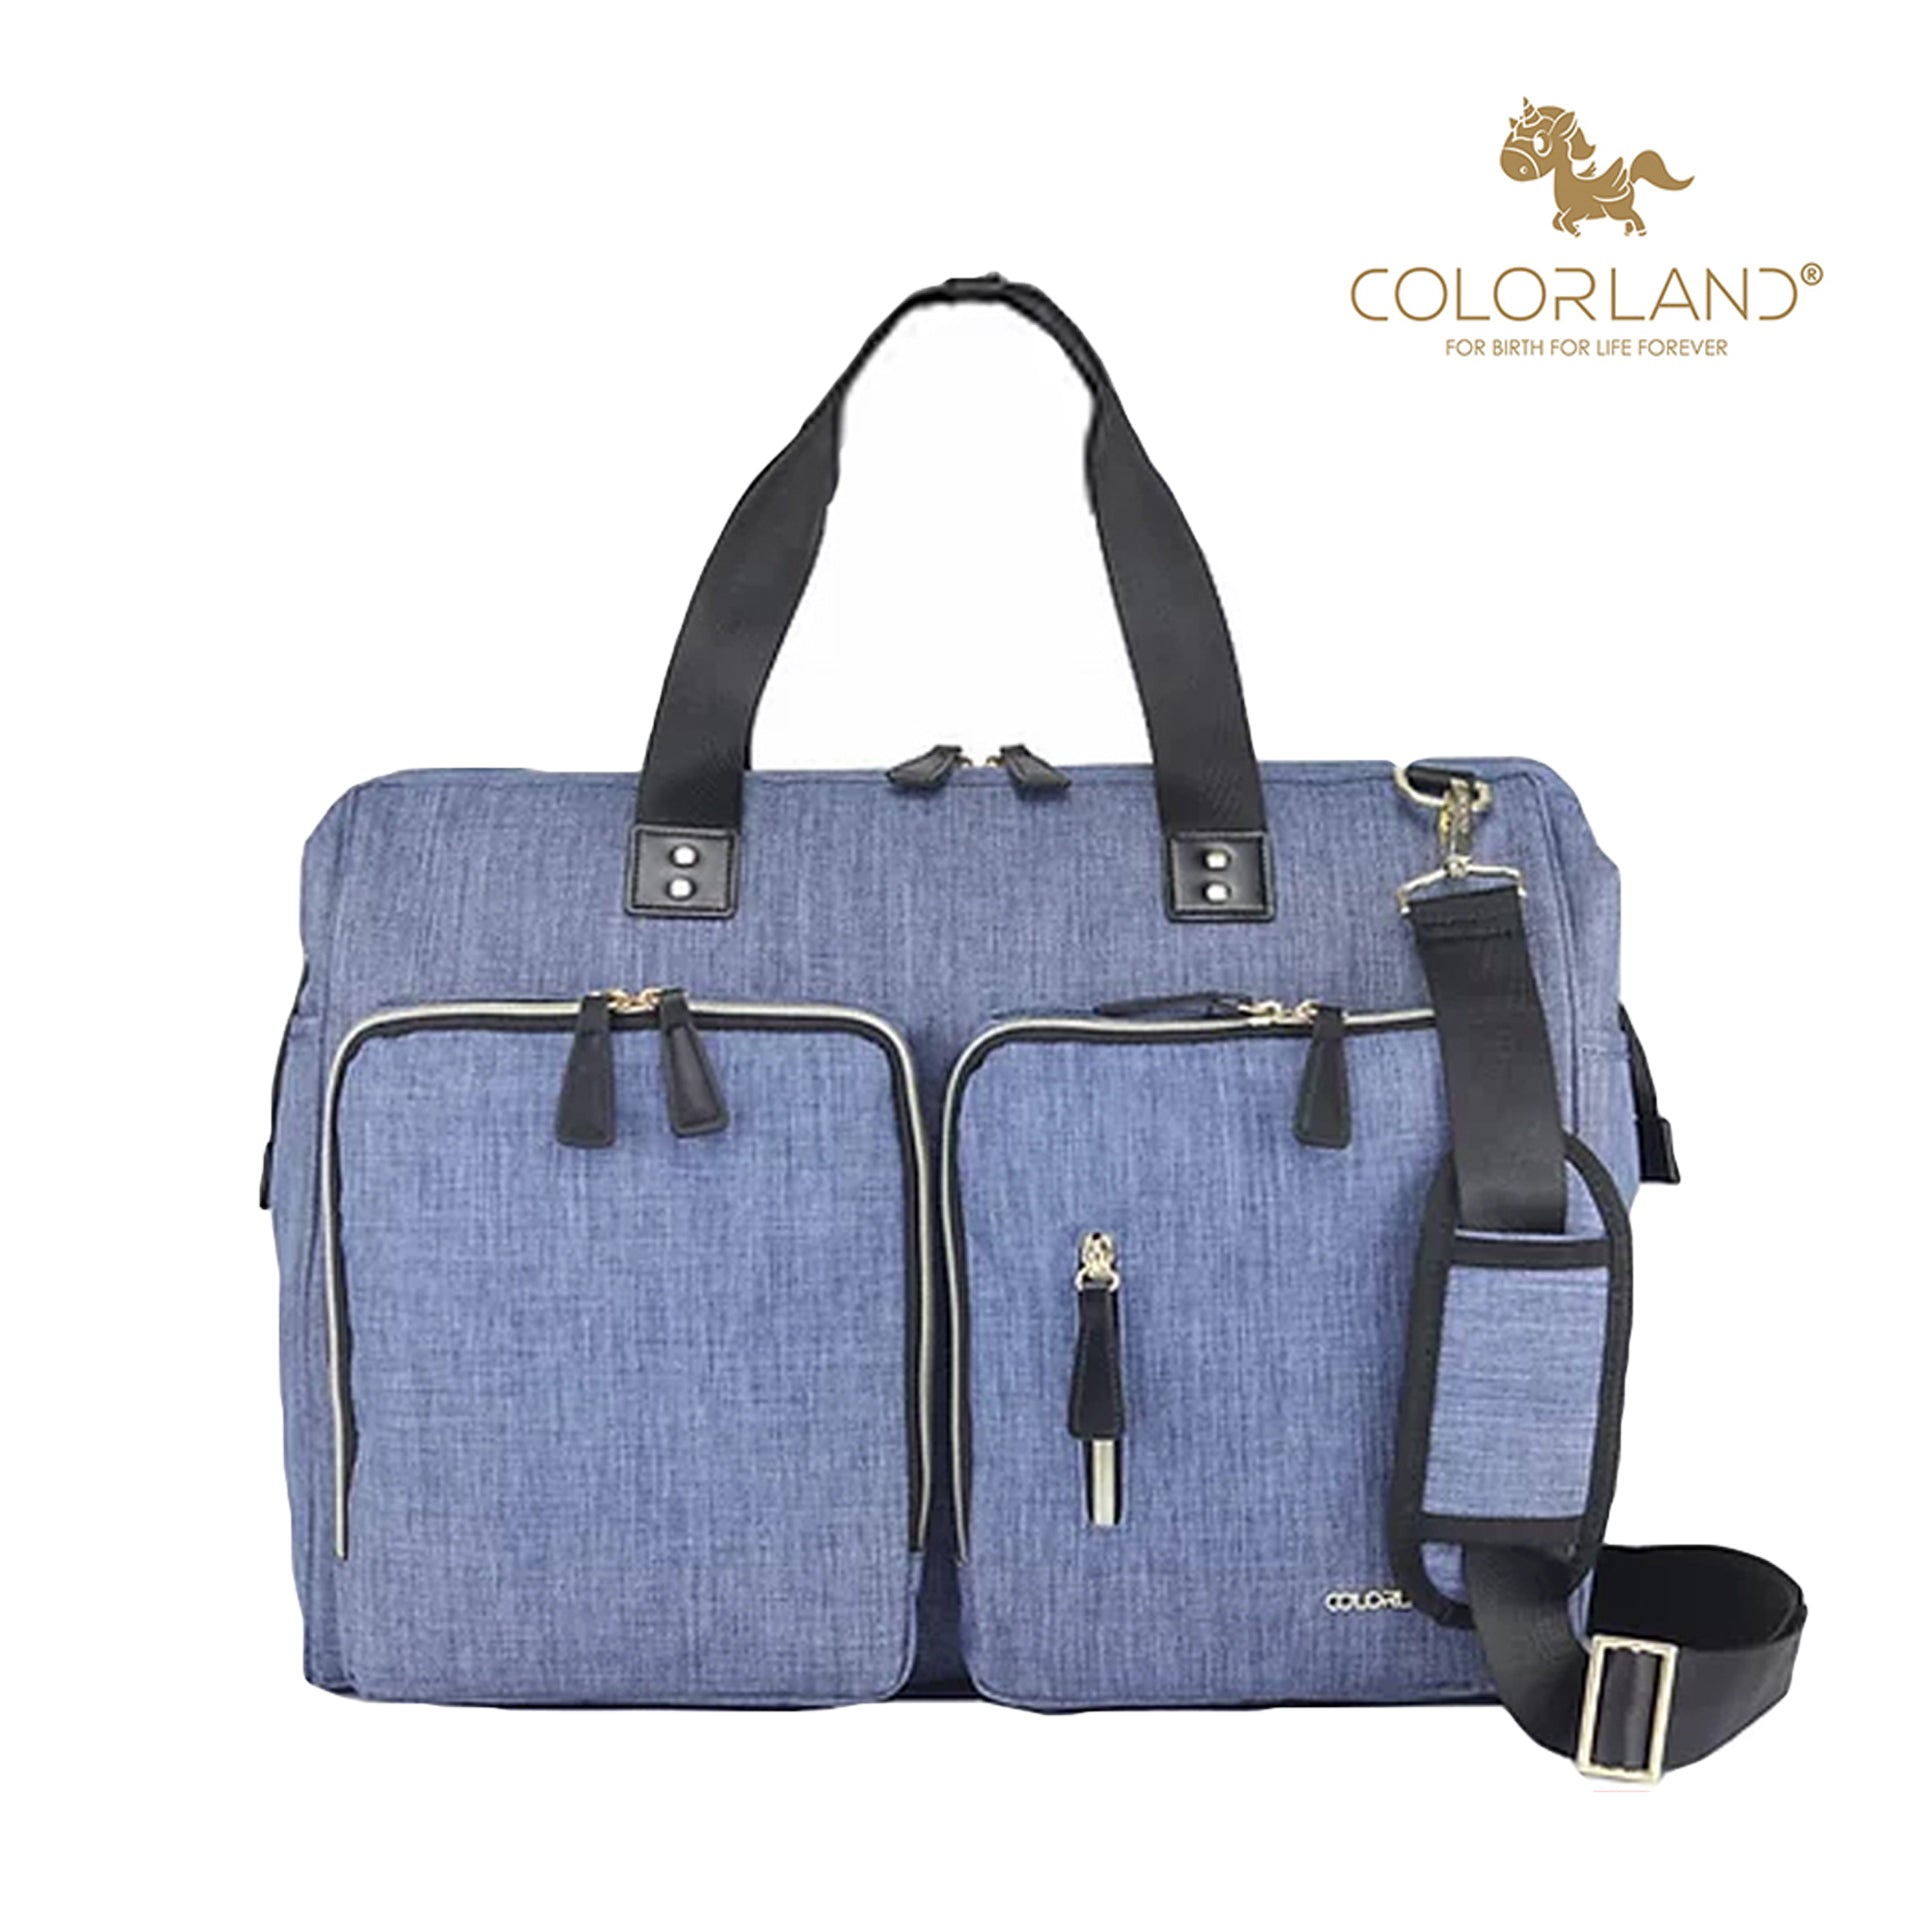 Colorland Mommy Diaper Tote Bag TT199-B/Blue)